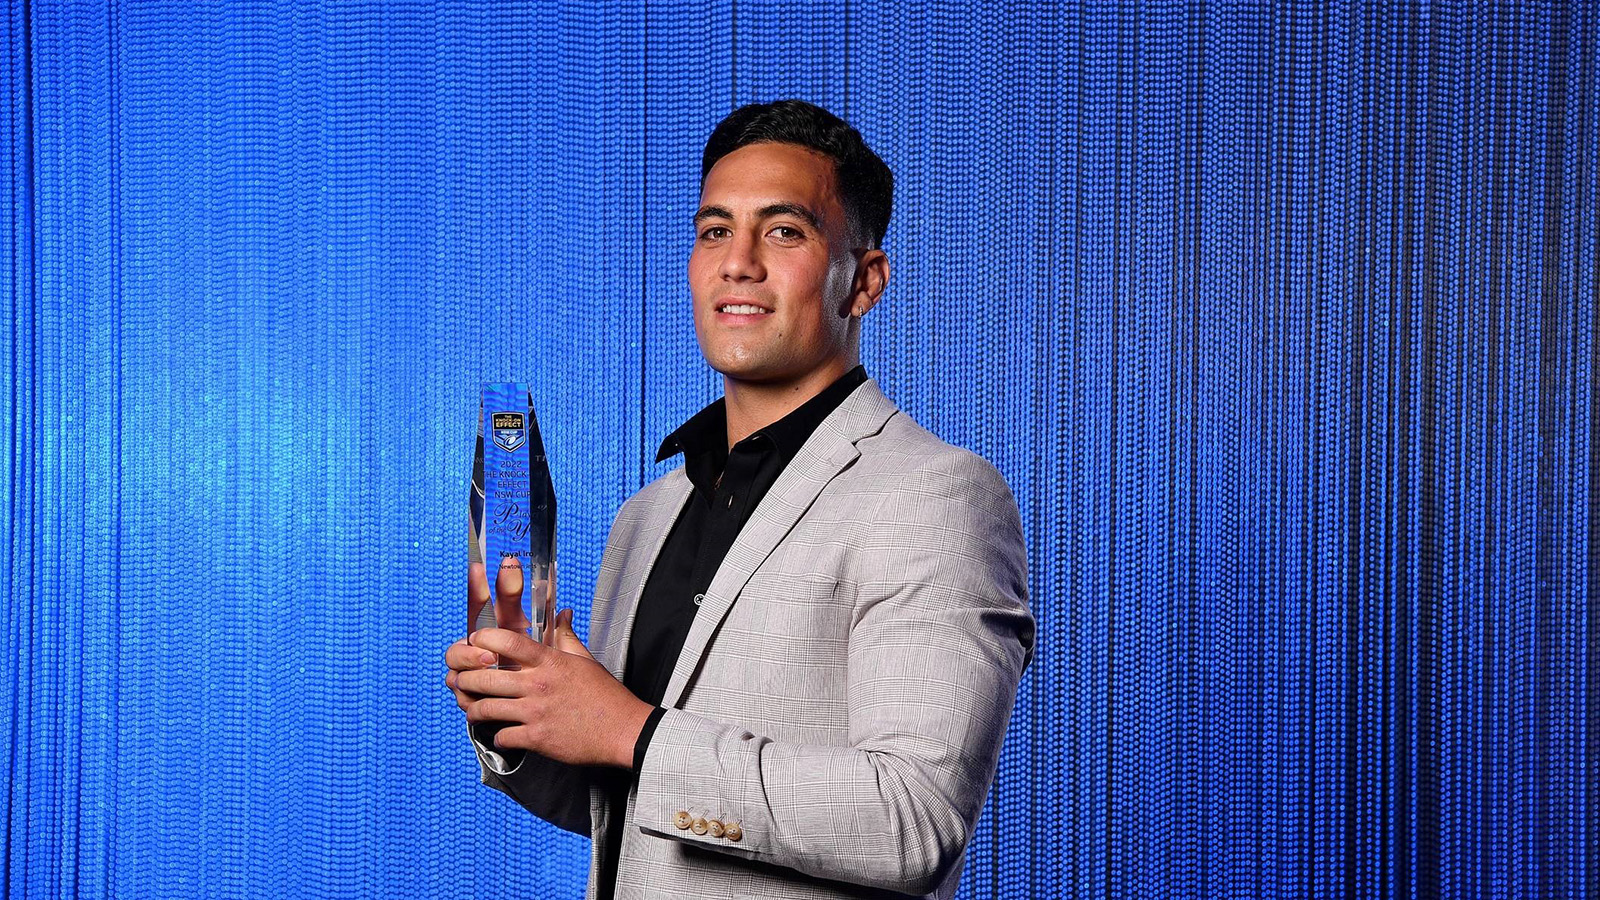 Iro named NSW Cup Player of the Year